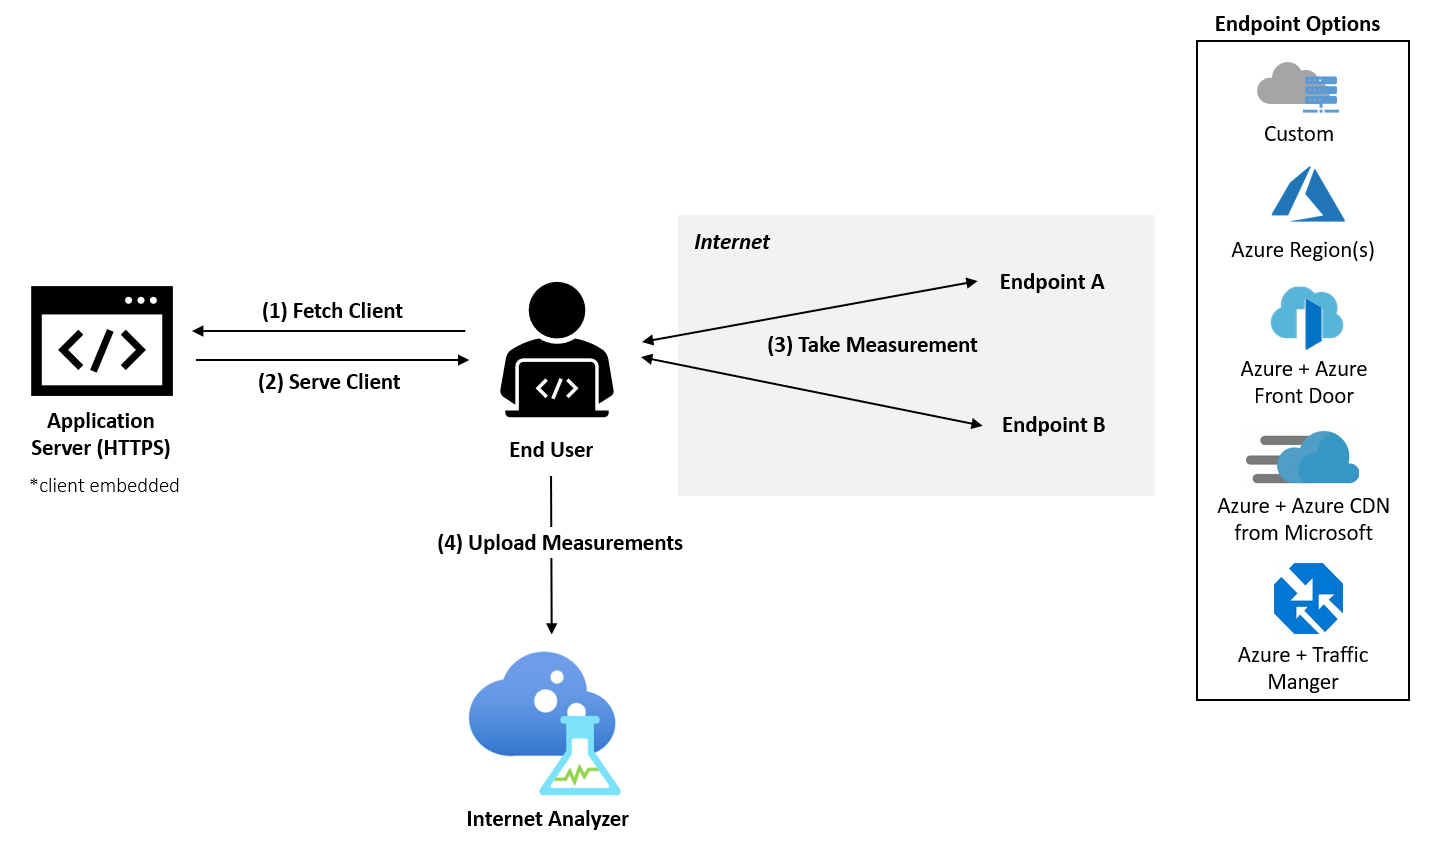 Diagram shows an end user connecting to an application server with client embedded and to the two endpoints on the internet from several options. The user uploads measurements to Internet Analyzer.